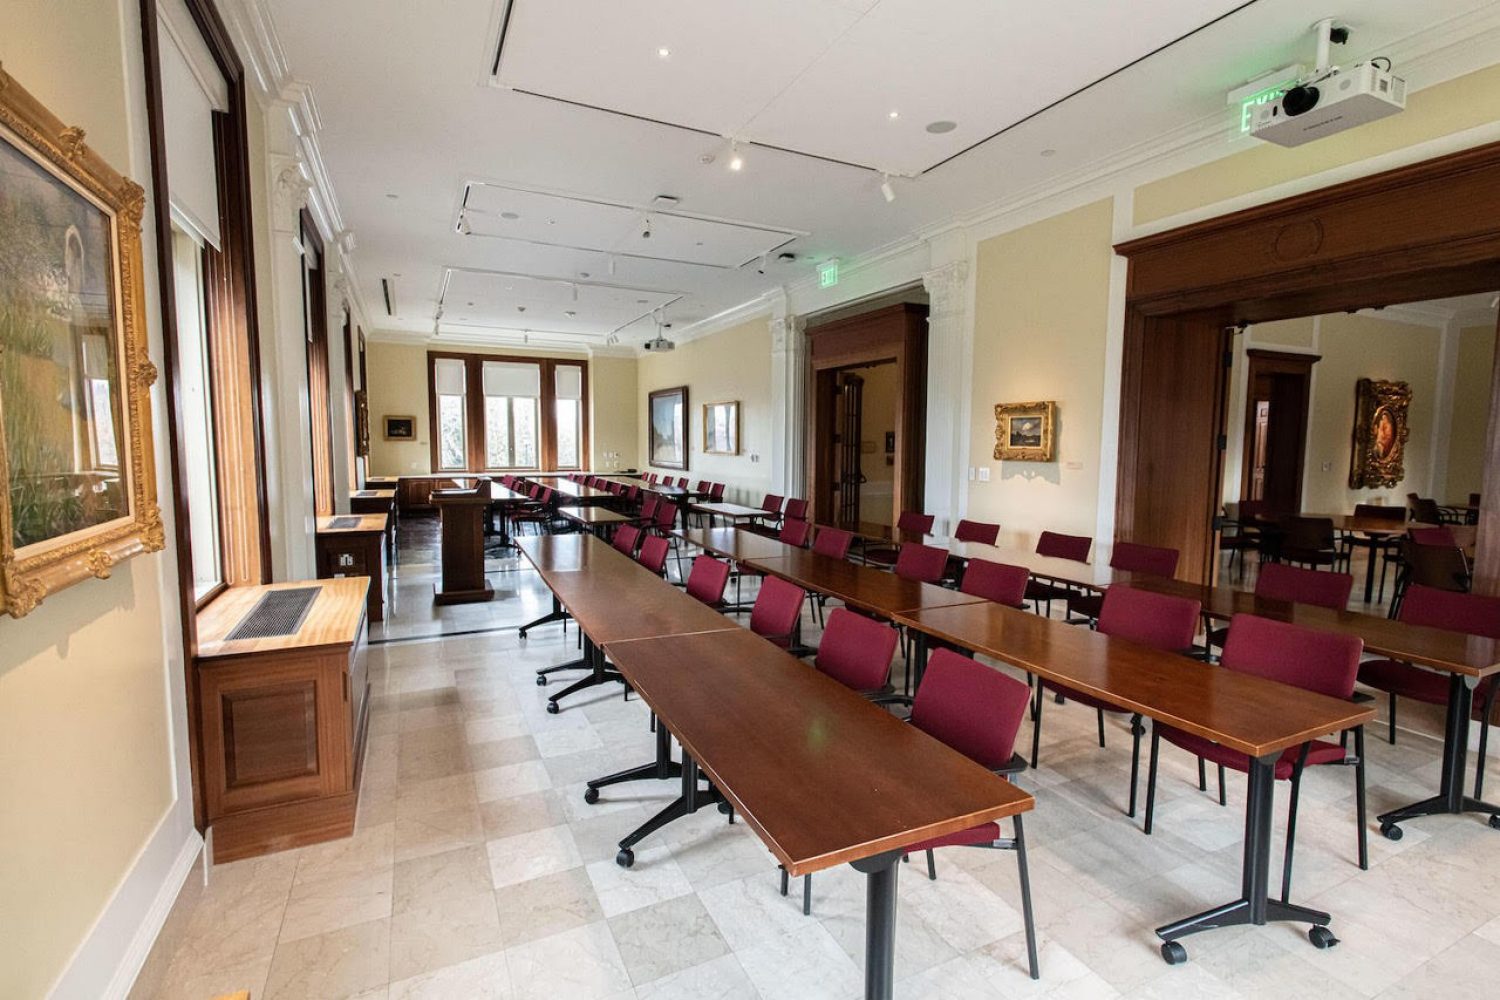 Hill Conference room